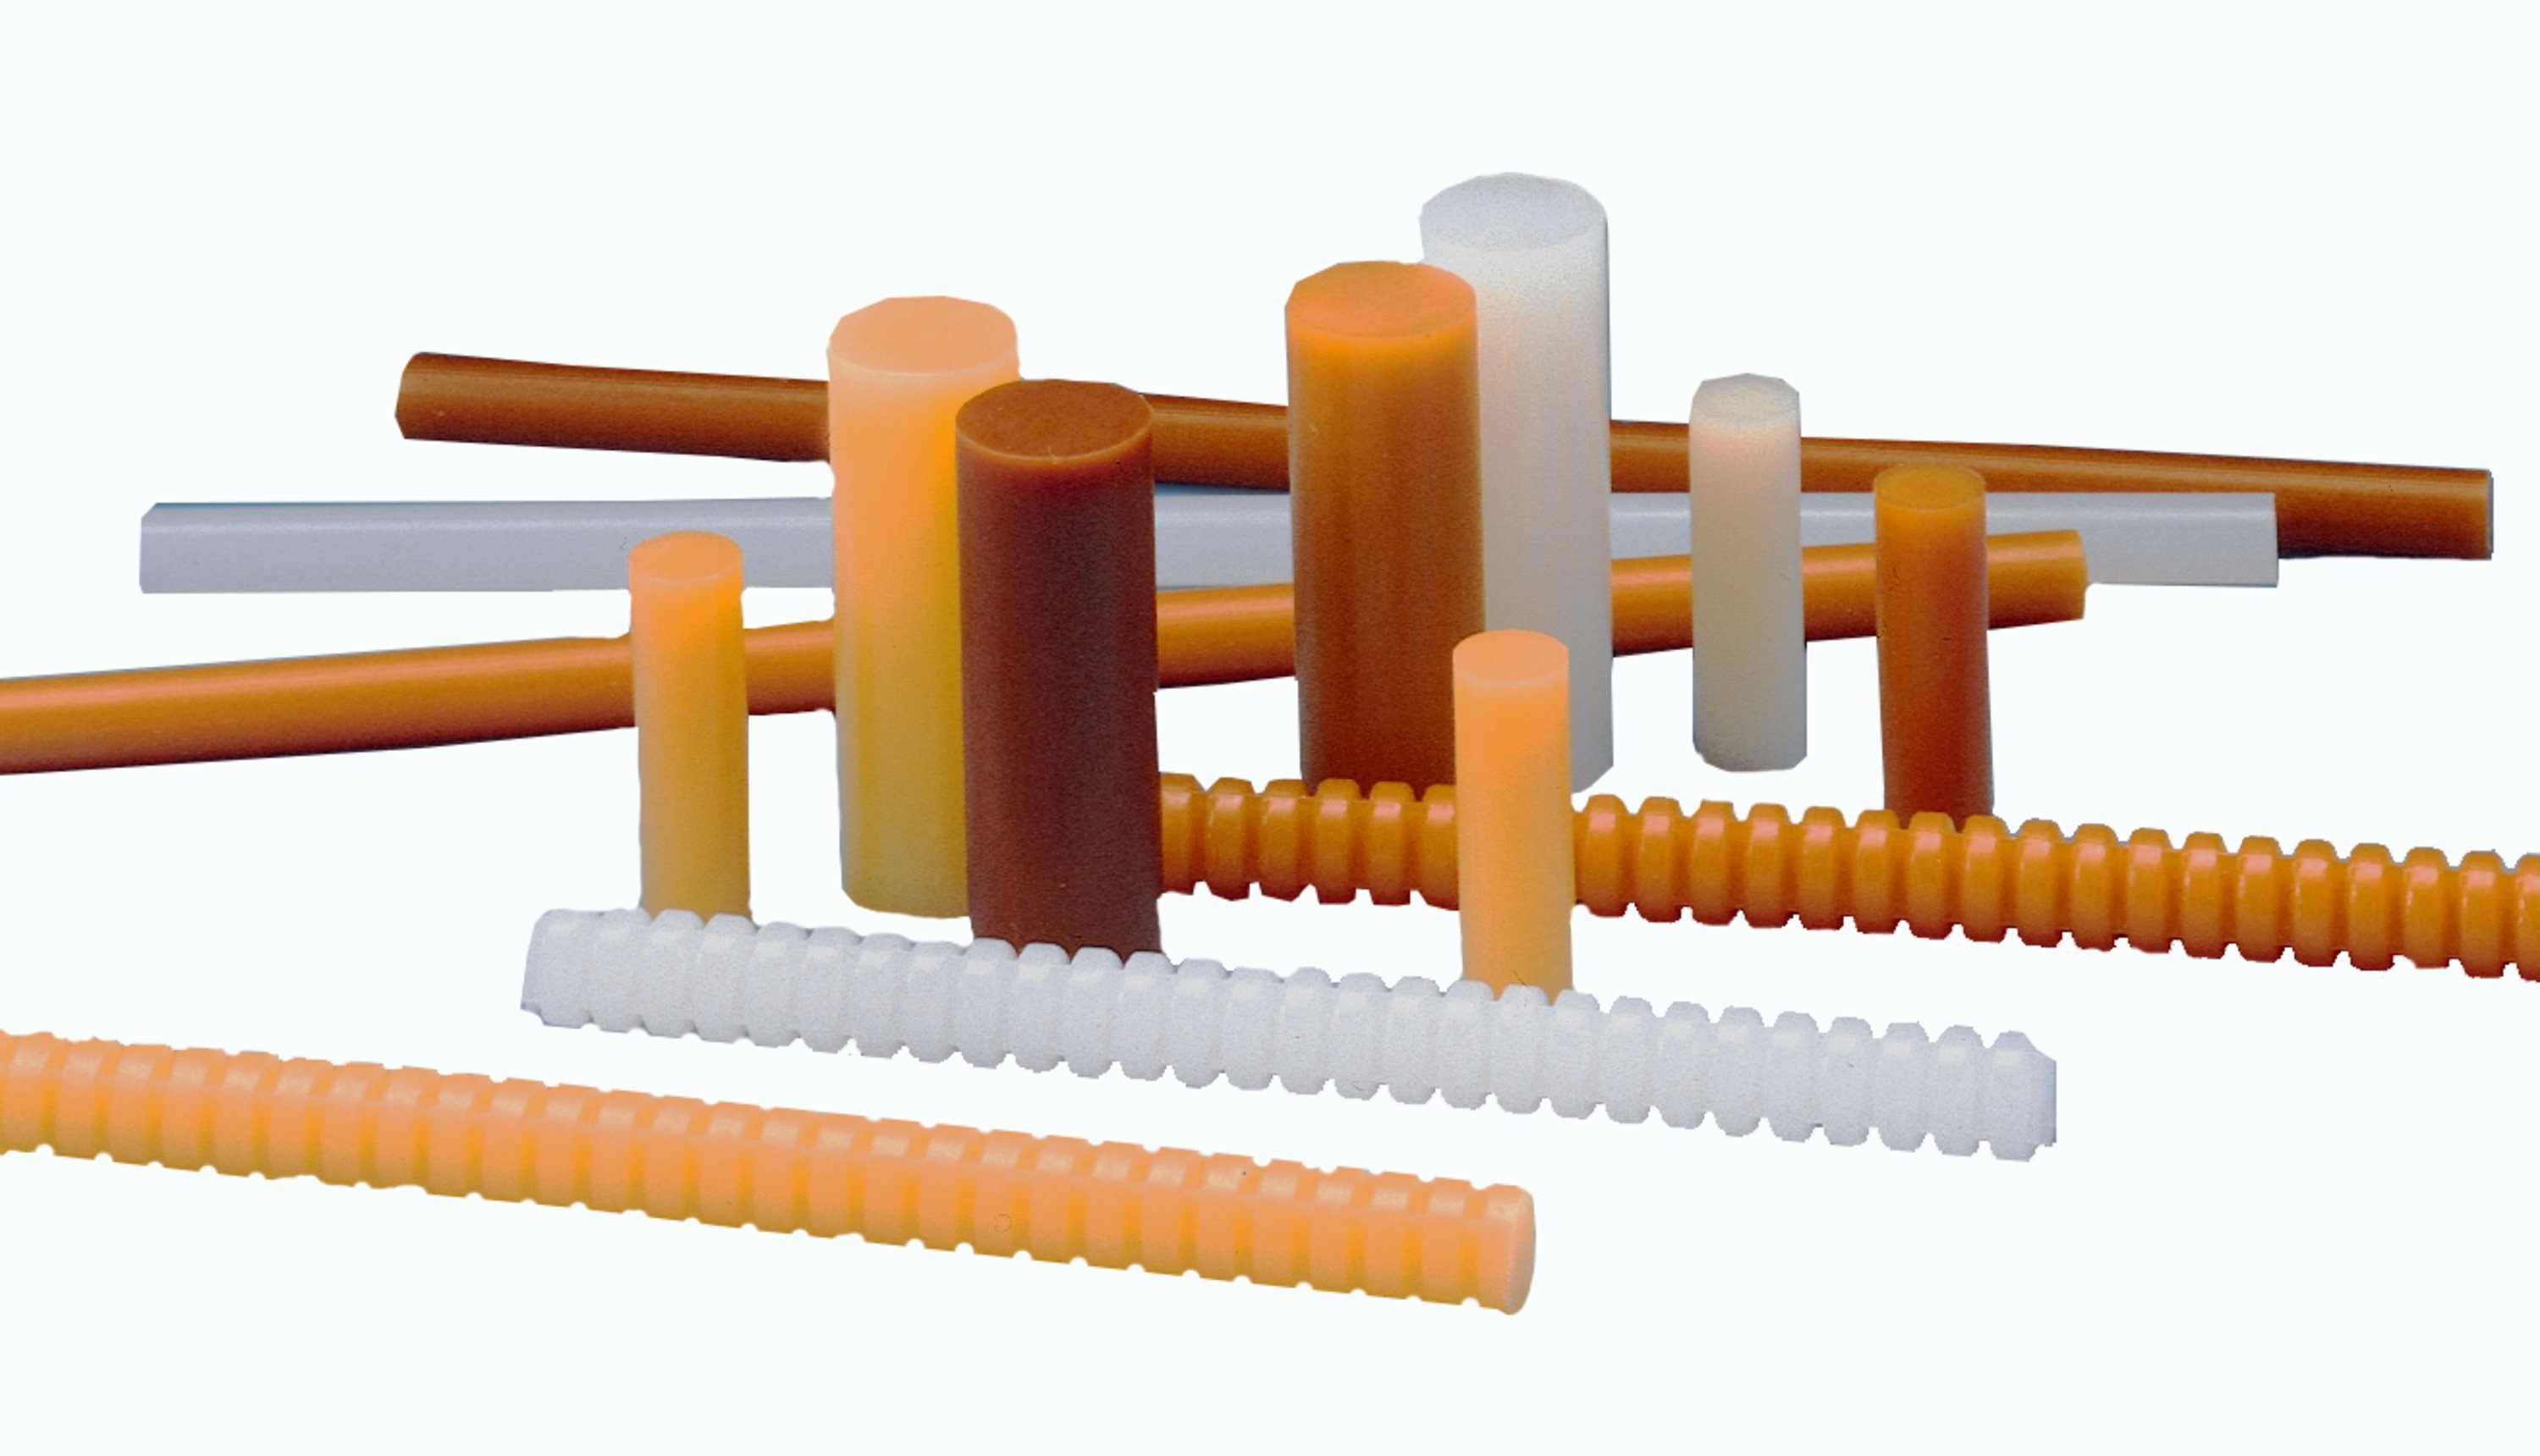 Hot melt adhesives, also known as glue sticks, are liquefied thermoplastic adhesives available in both low and high temperature versions.